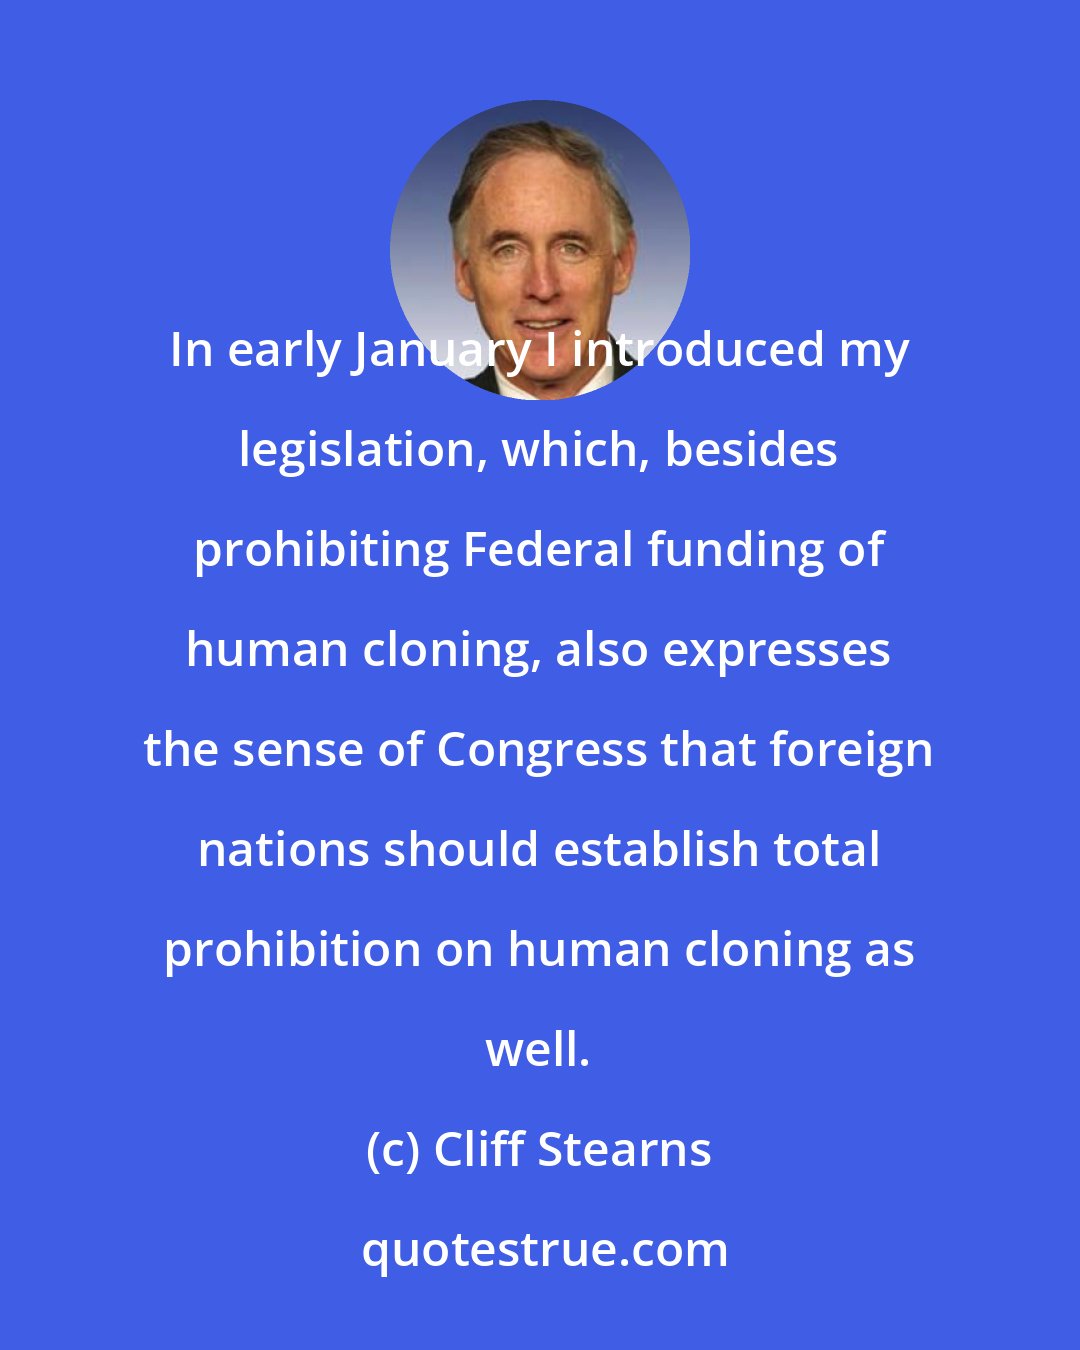 Cliff Stearns: In early January I introduced my legislation, which, besides prohibiting Federal funding of human cloning, also expresses the sense of Congress that foreign nations should establish total prohibition on human cloning as well.